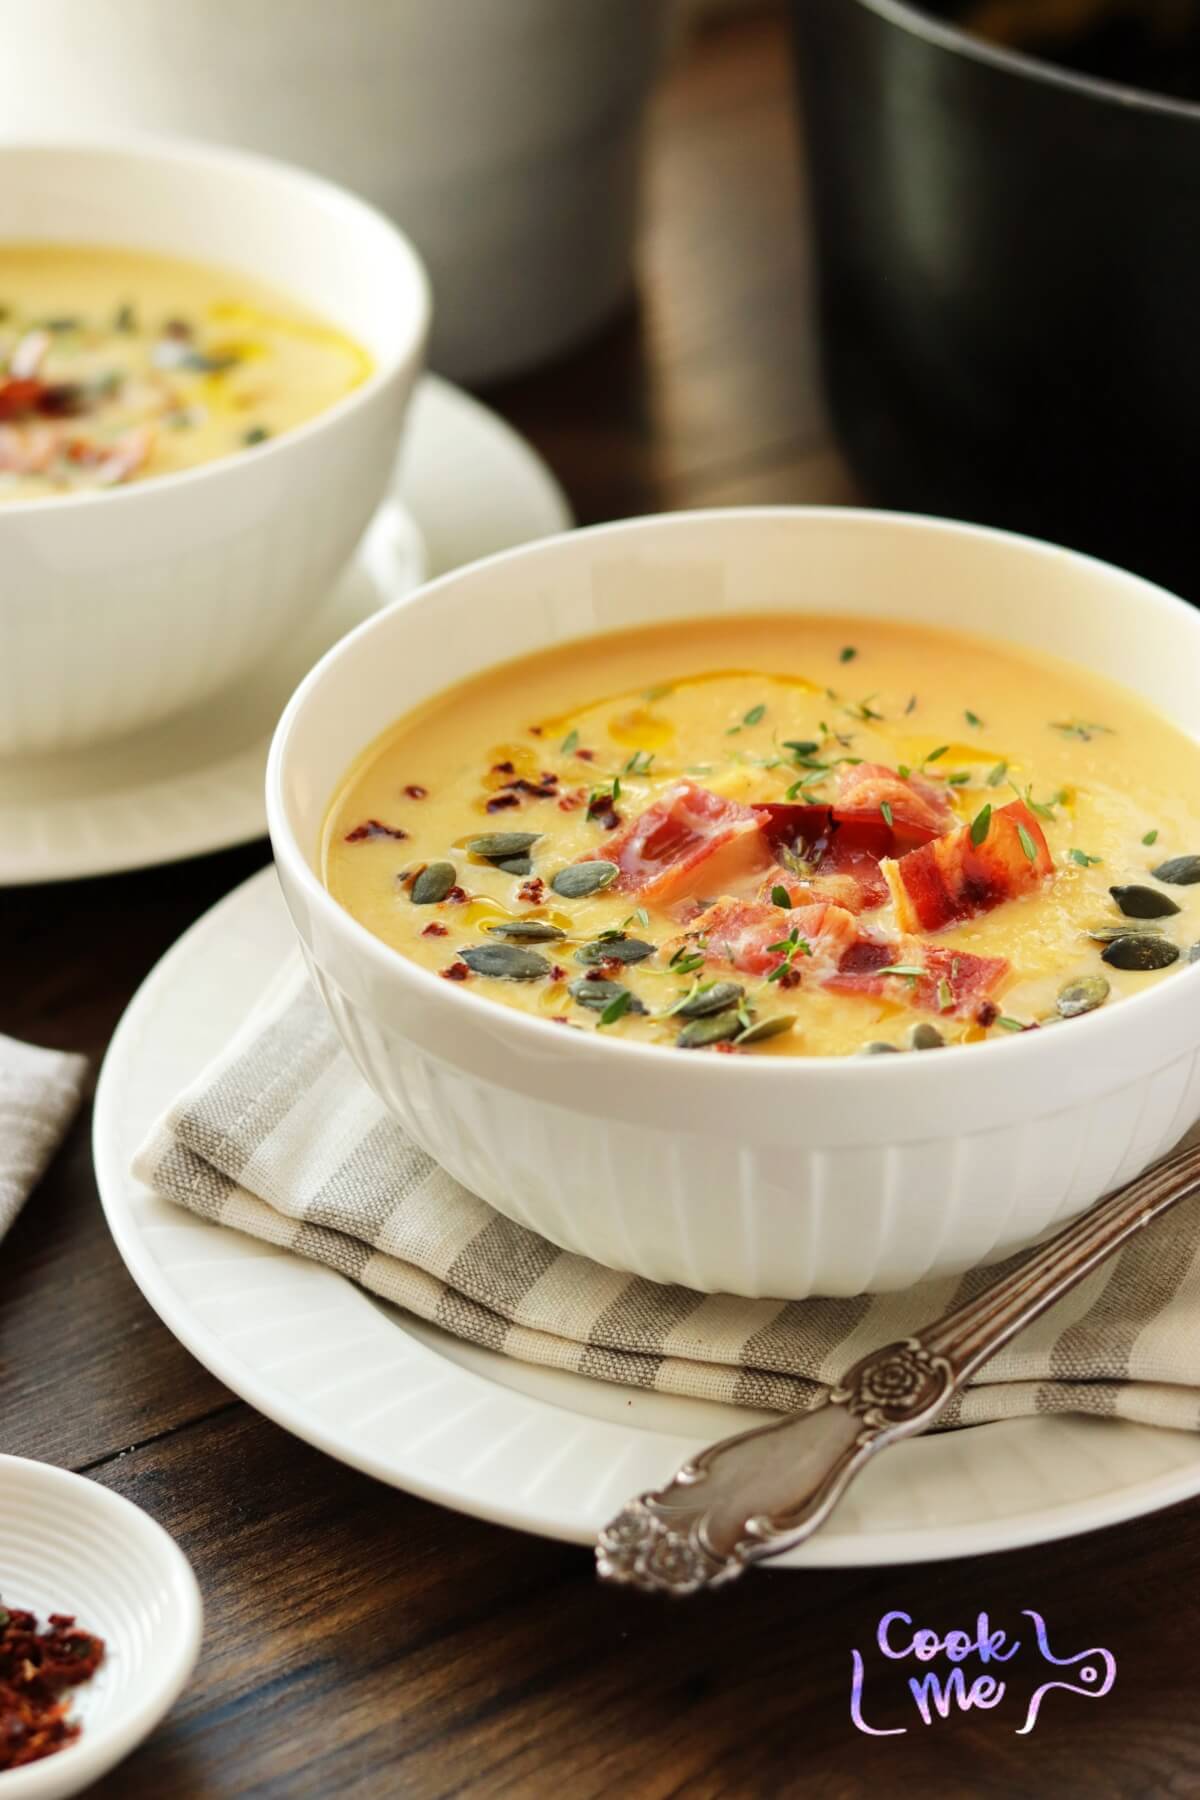 Roasted Pumpkin Soup with Bacon and Thyme Recipe - Cook.me Recipes